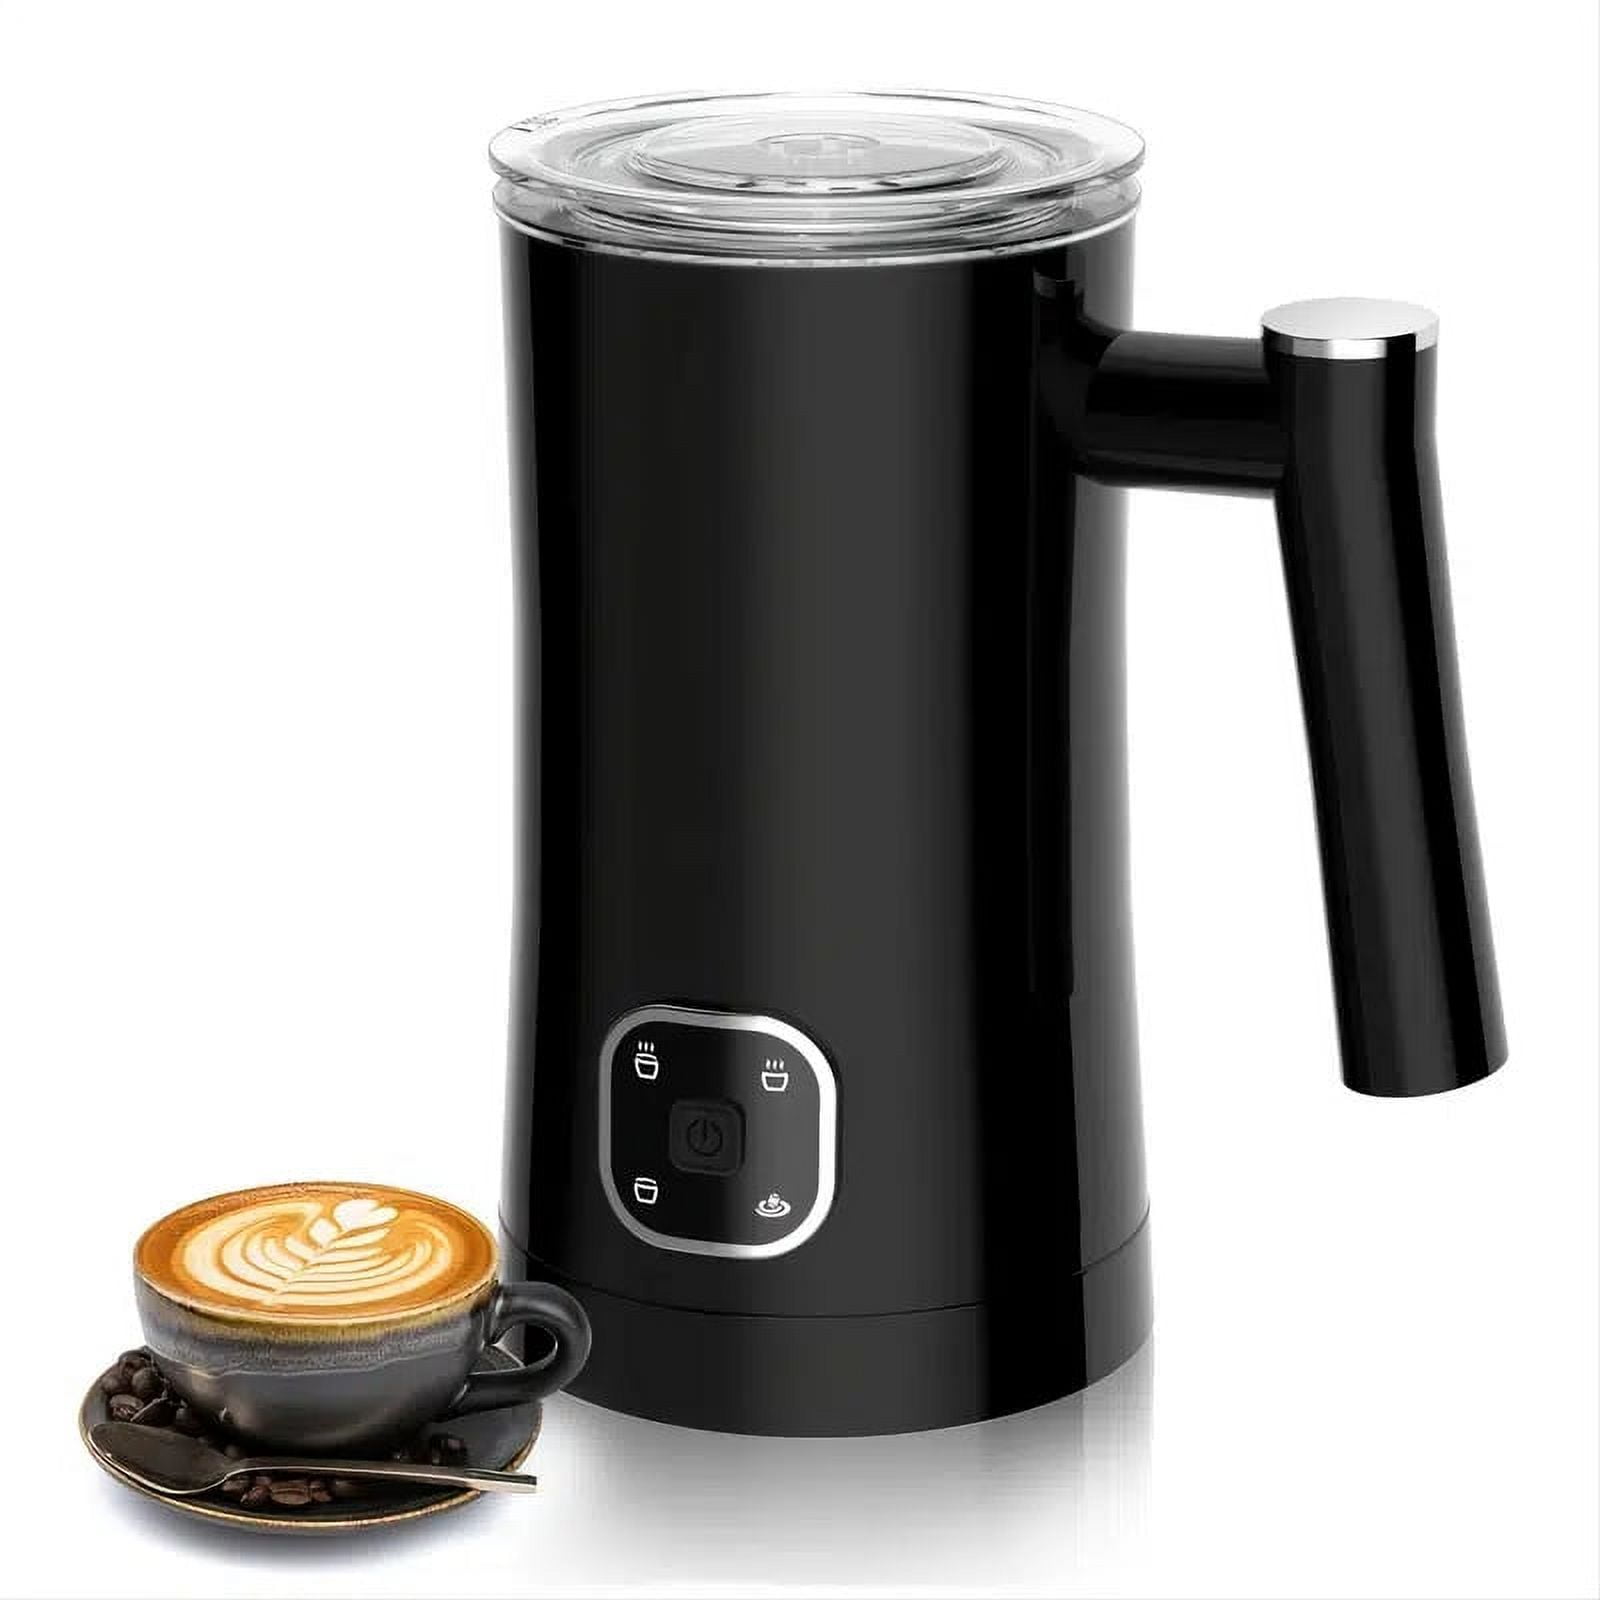 SL4U Milk Frother, 4-in-1 Electric Hot & Cold Foam Maker and Milk Foamer  for Coffee